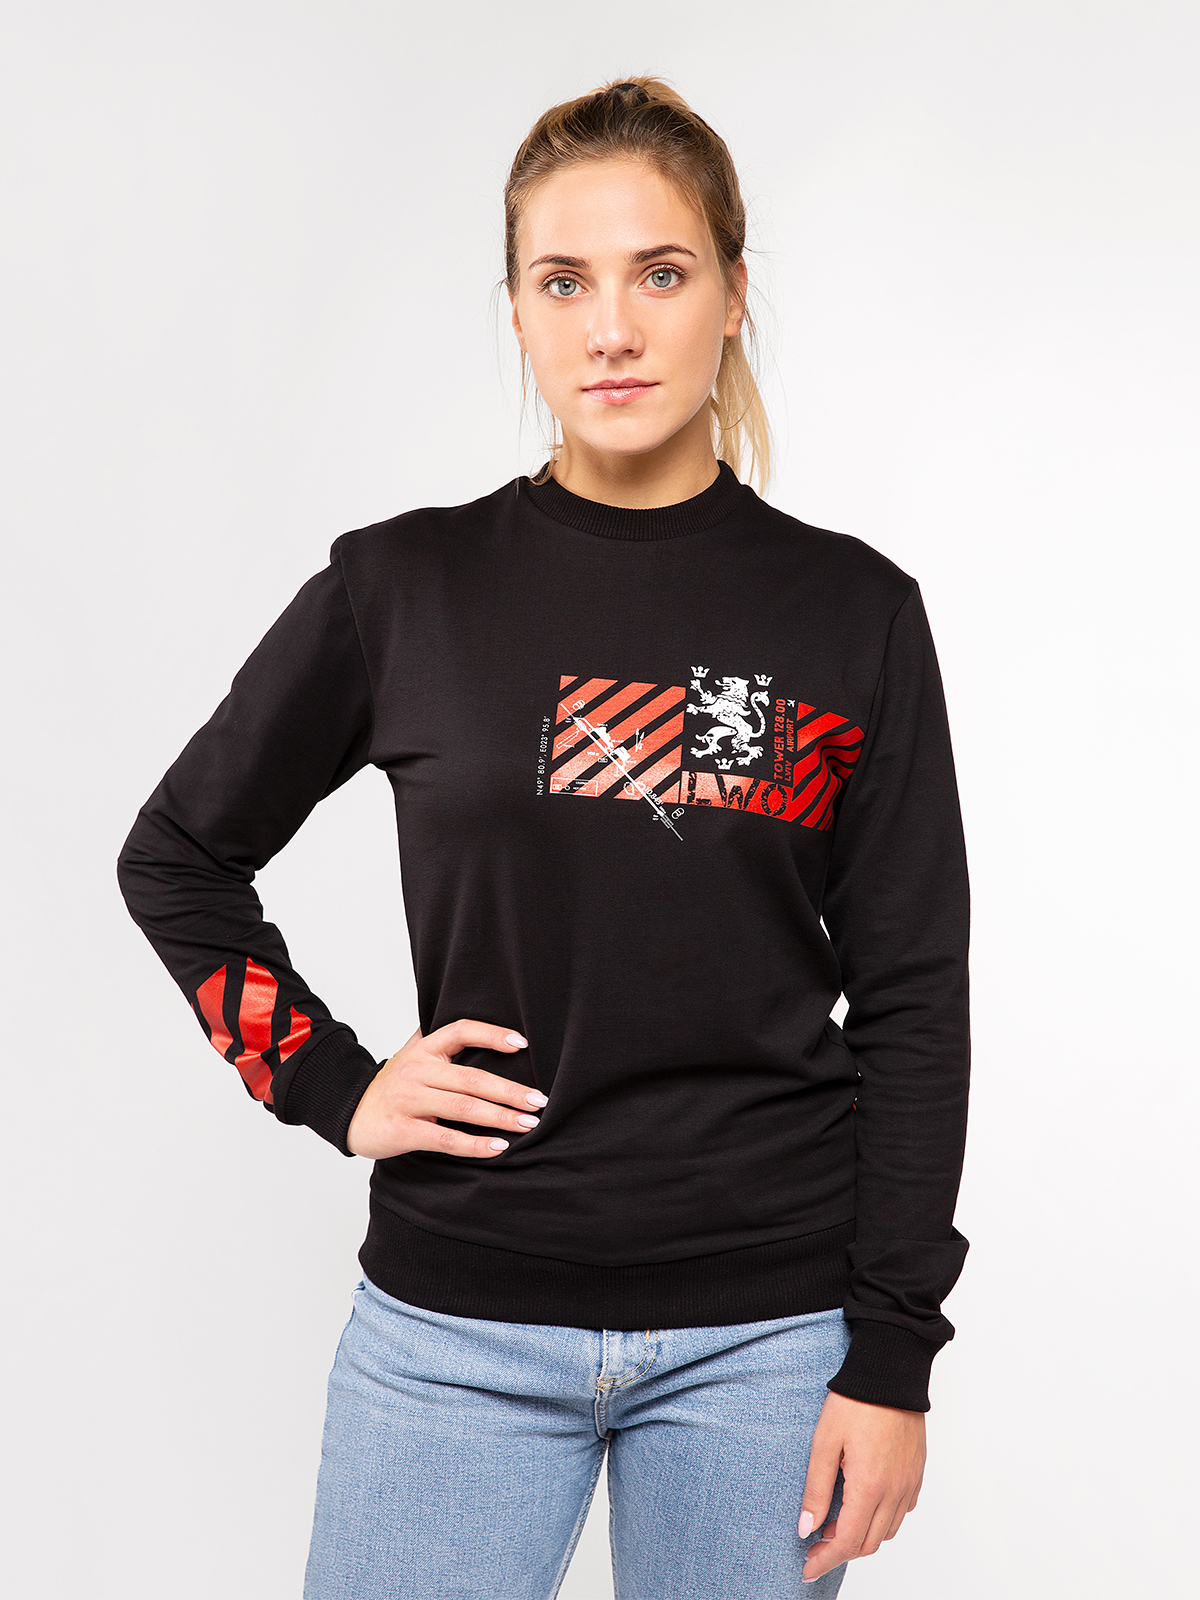 Women's Long Sleeve See You In Lviv. Color black. Material: 97% cotton, 3% spandex.